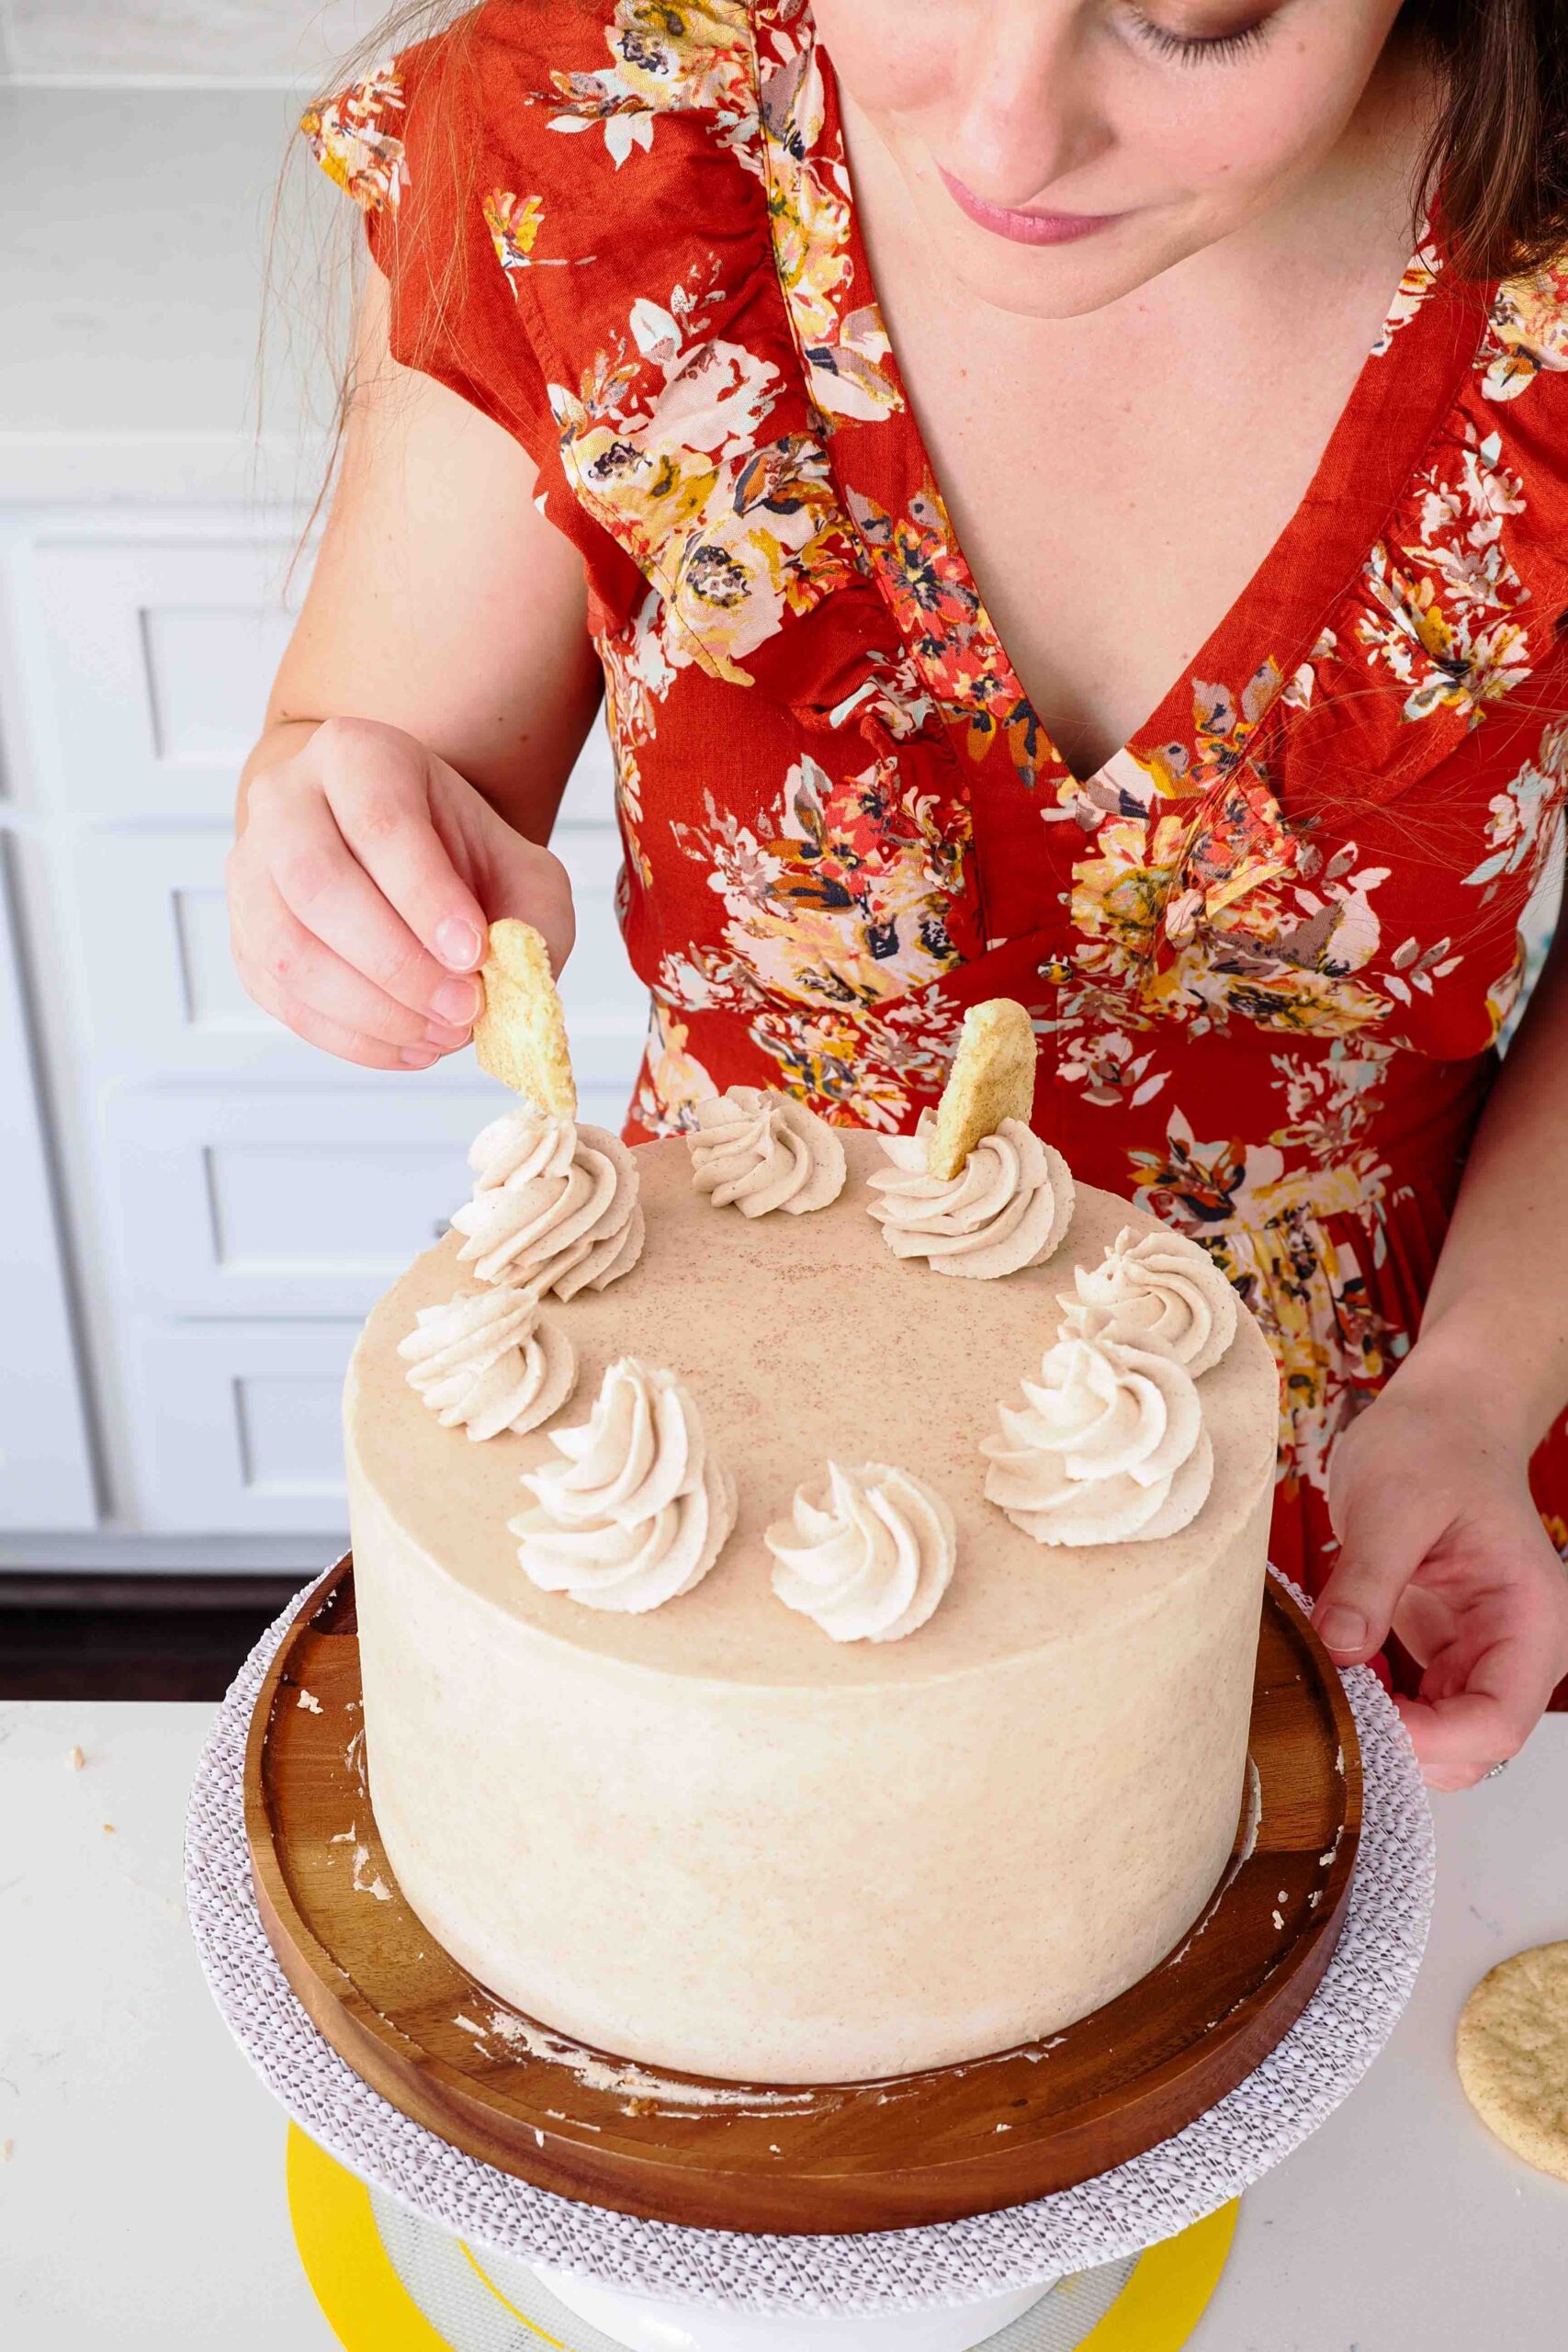 A woman adds wedges of snickerdoodle cookies on top of a cake.